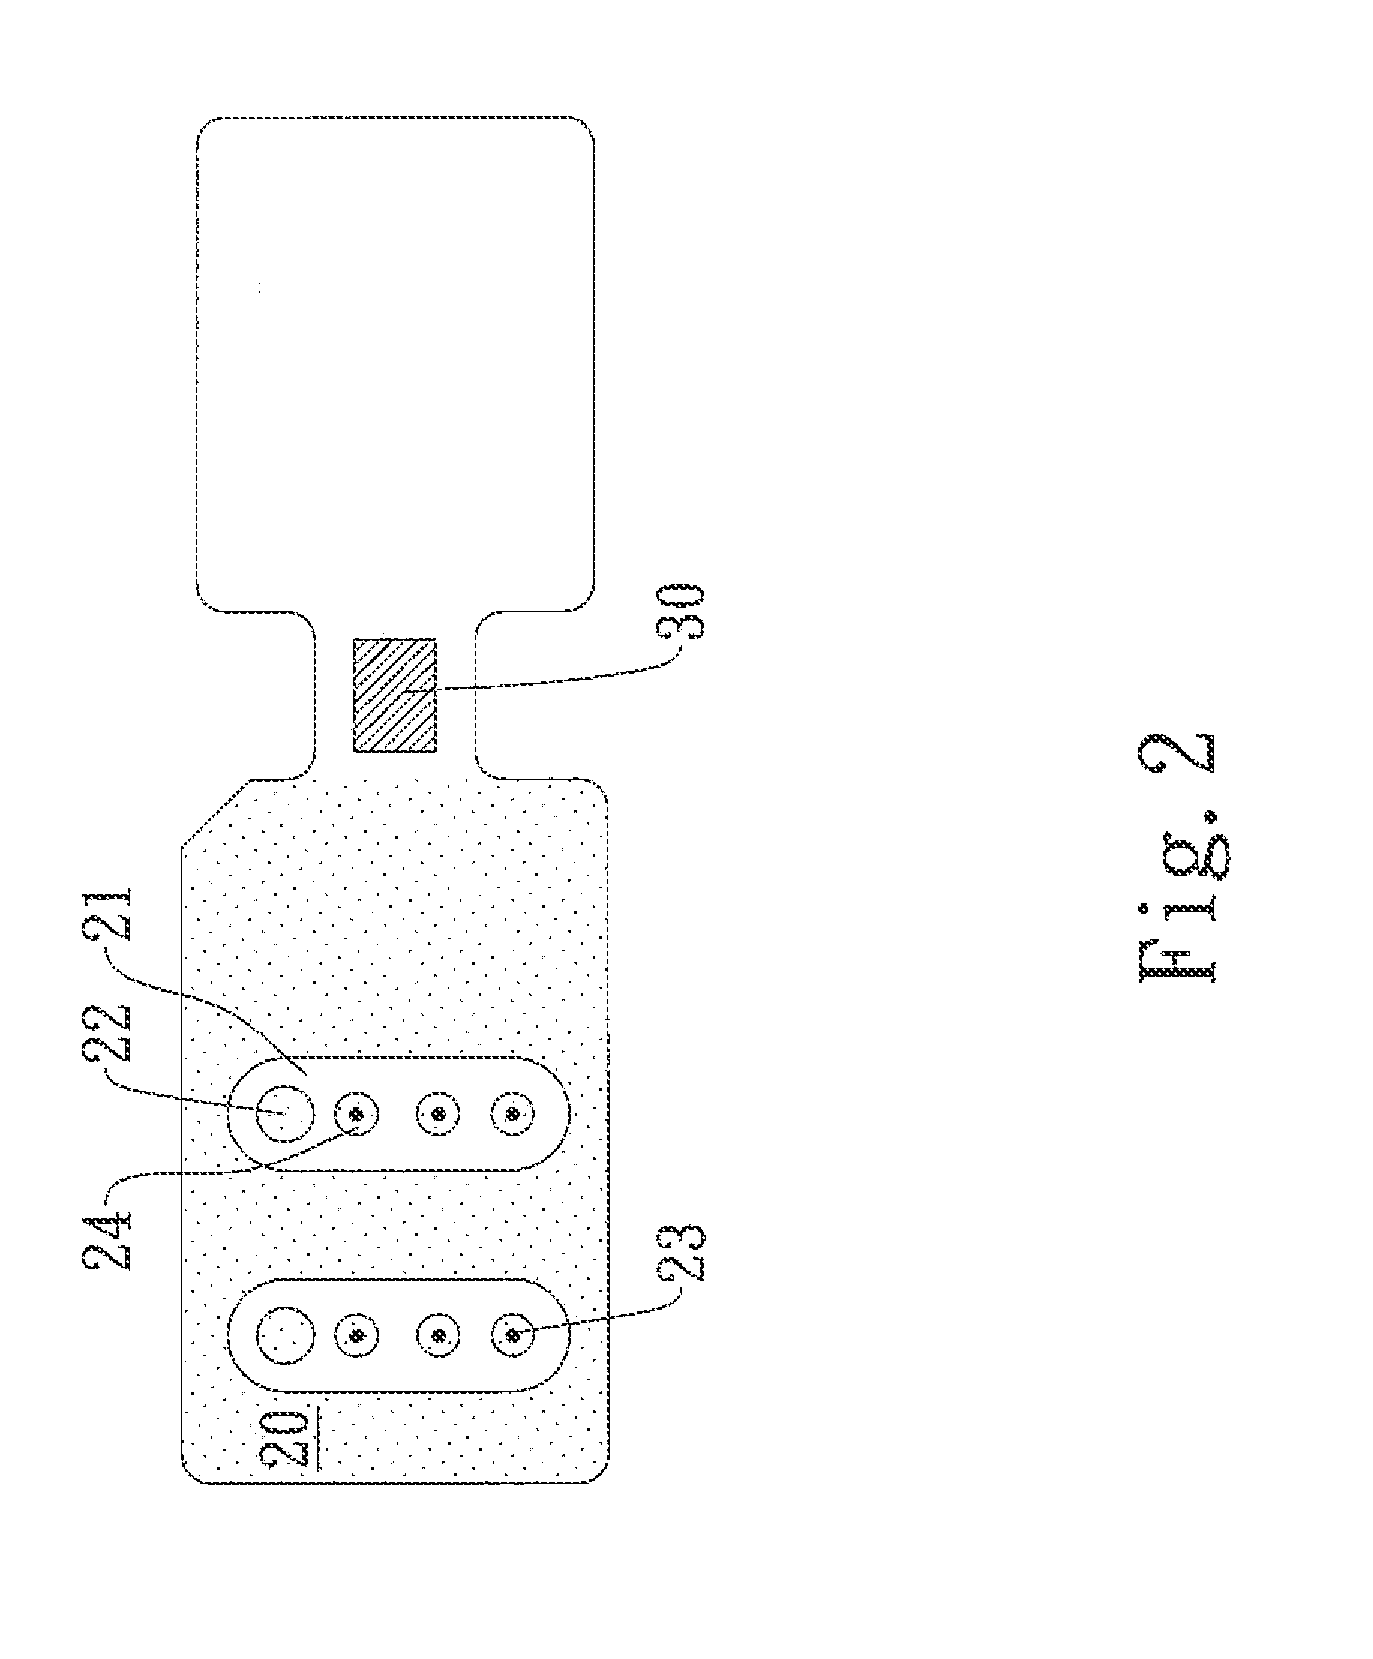 Signal Processing Device